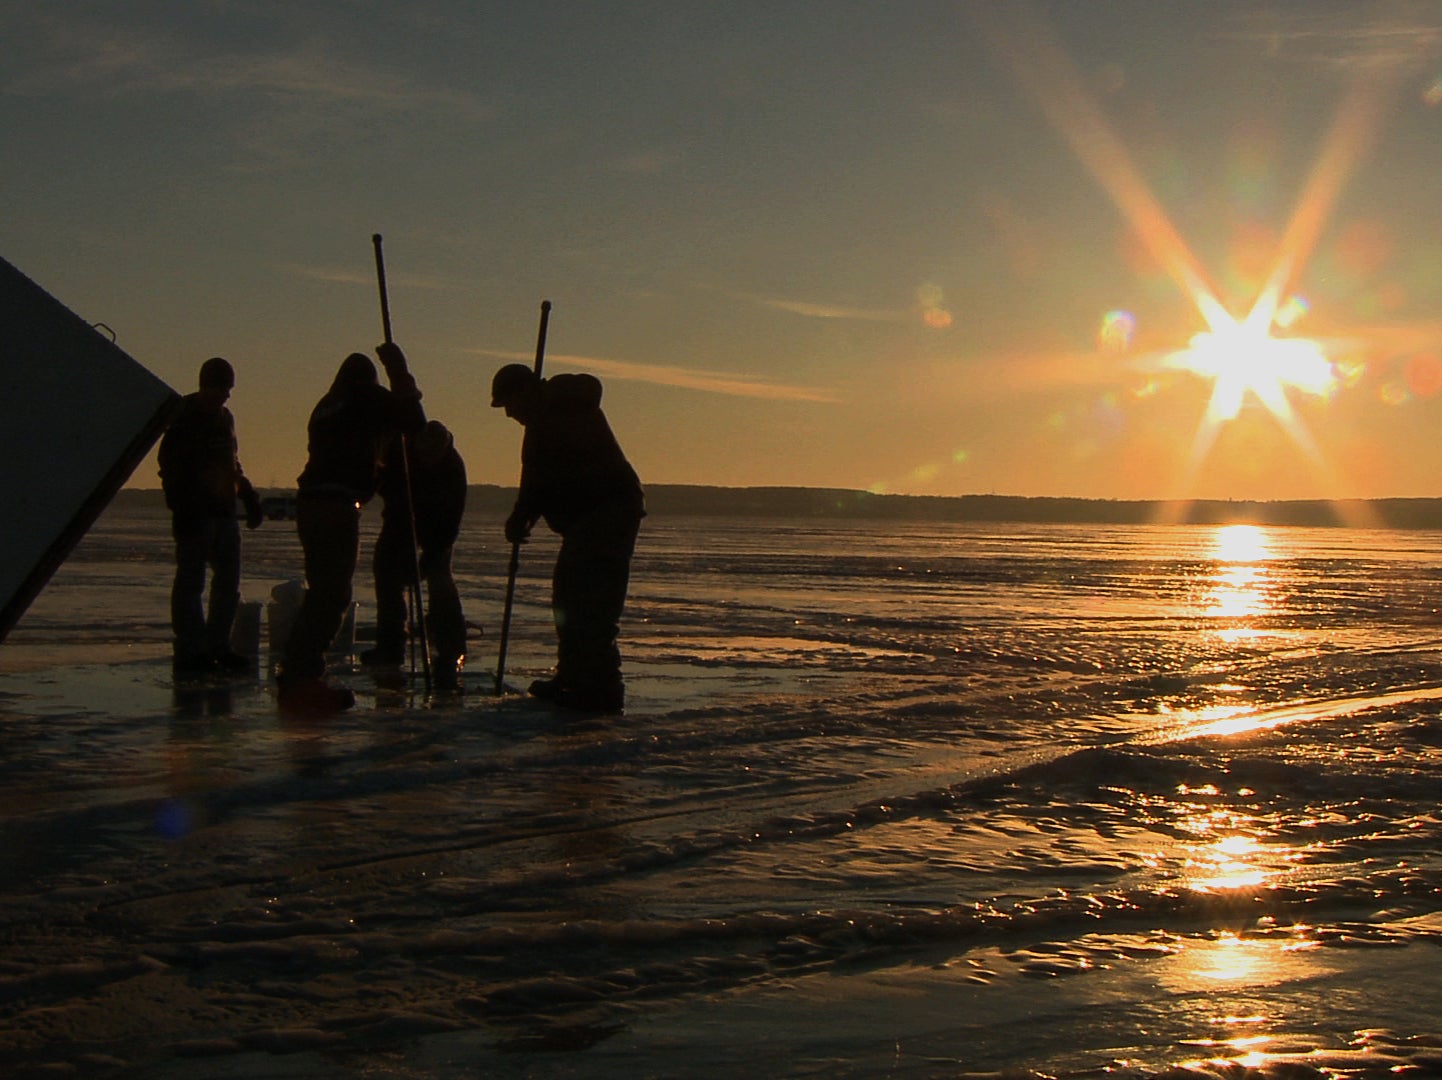 The fishermen are out on the ice for 16 days straight